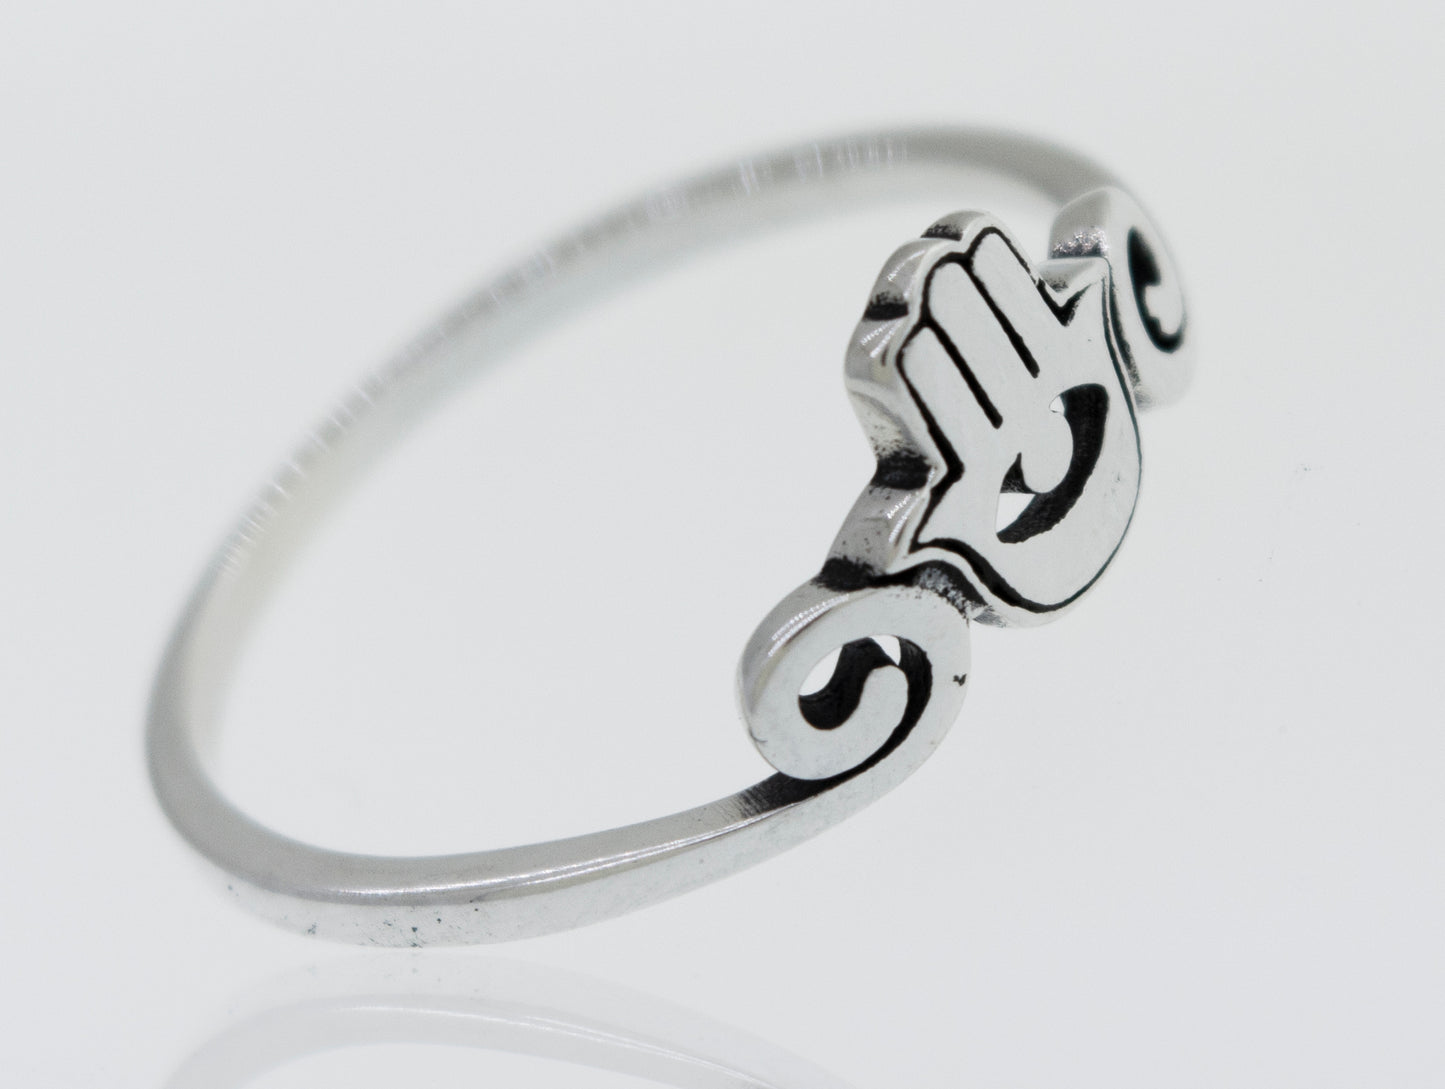 A Hamsa Ring made of sterling silver on a white surface.